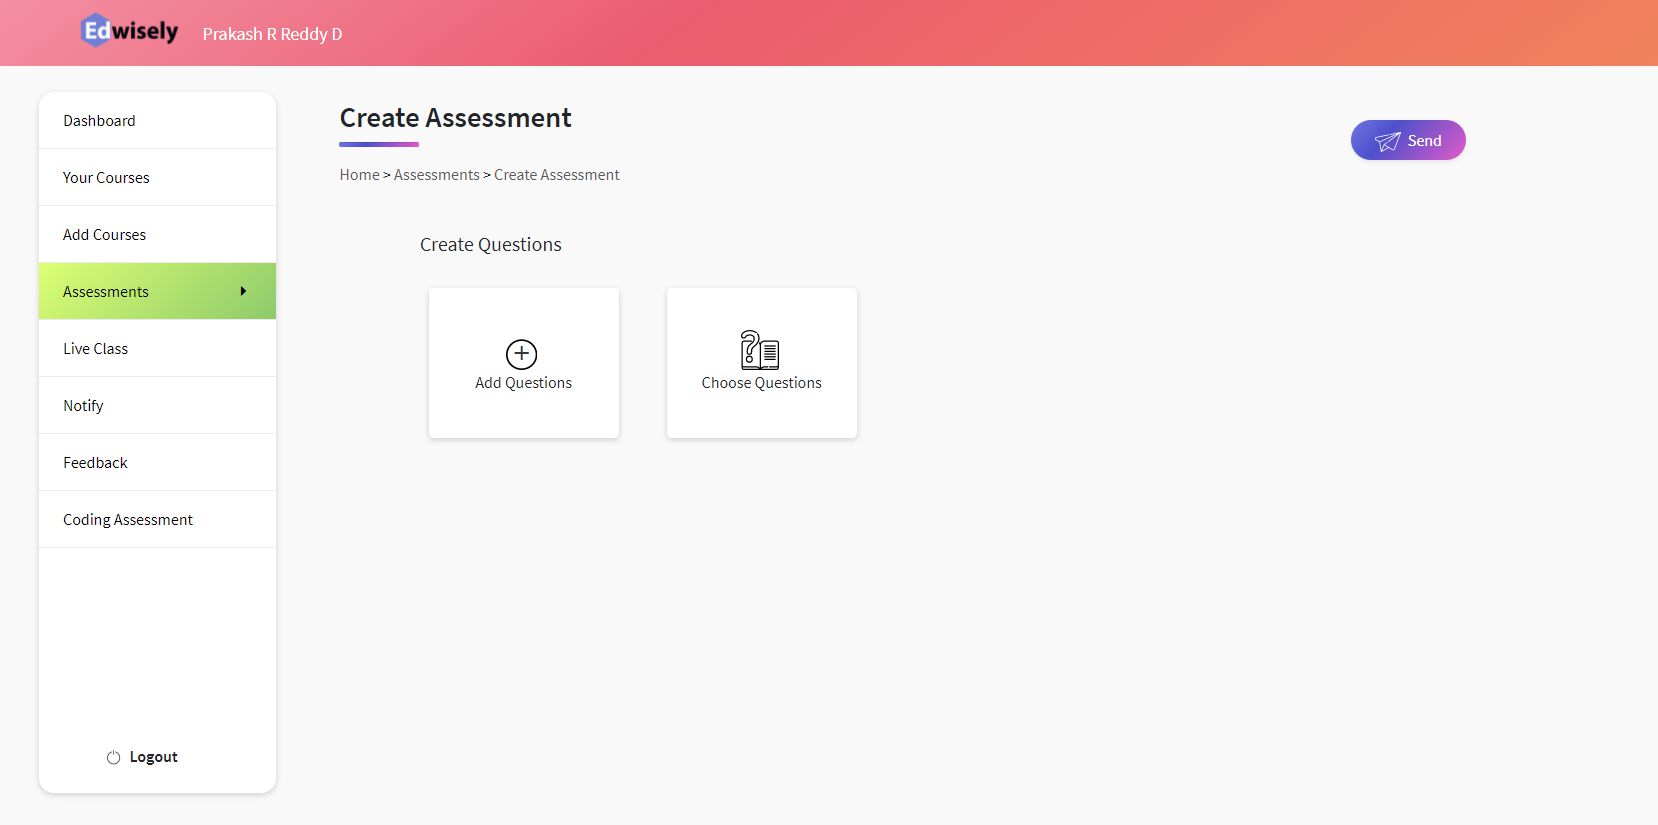 Step 2 – Adding Questions to Assessment